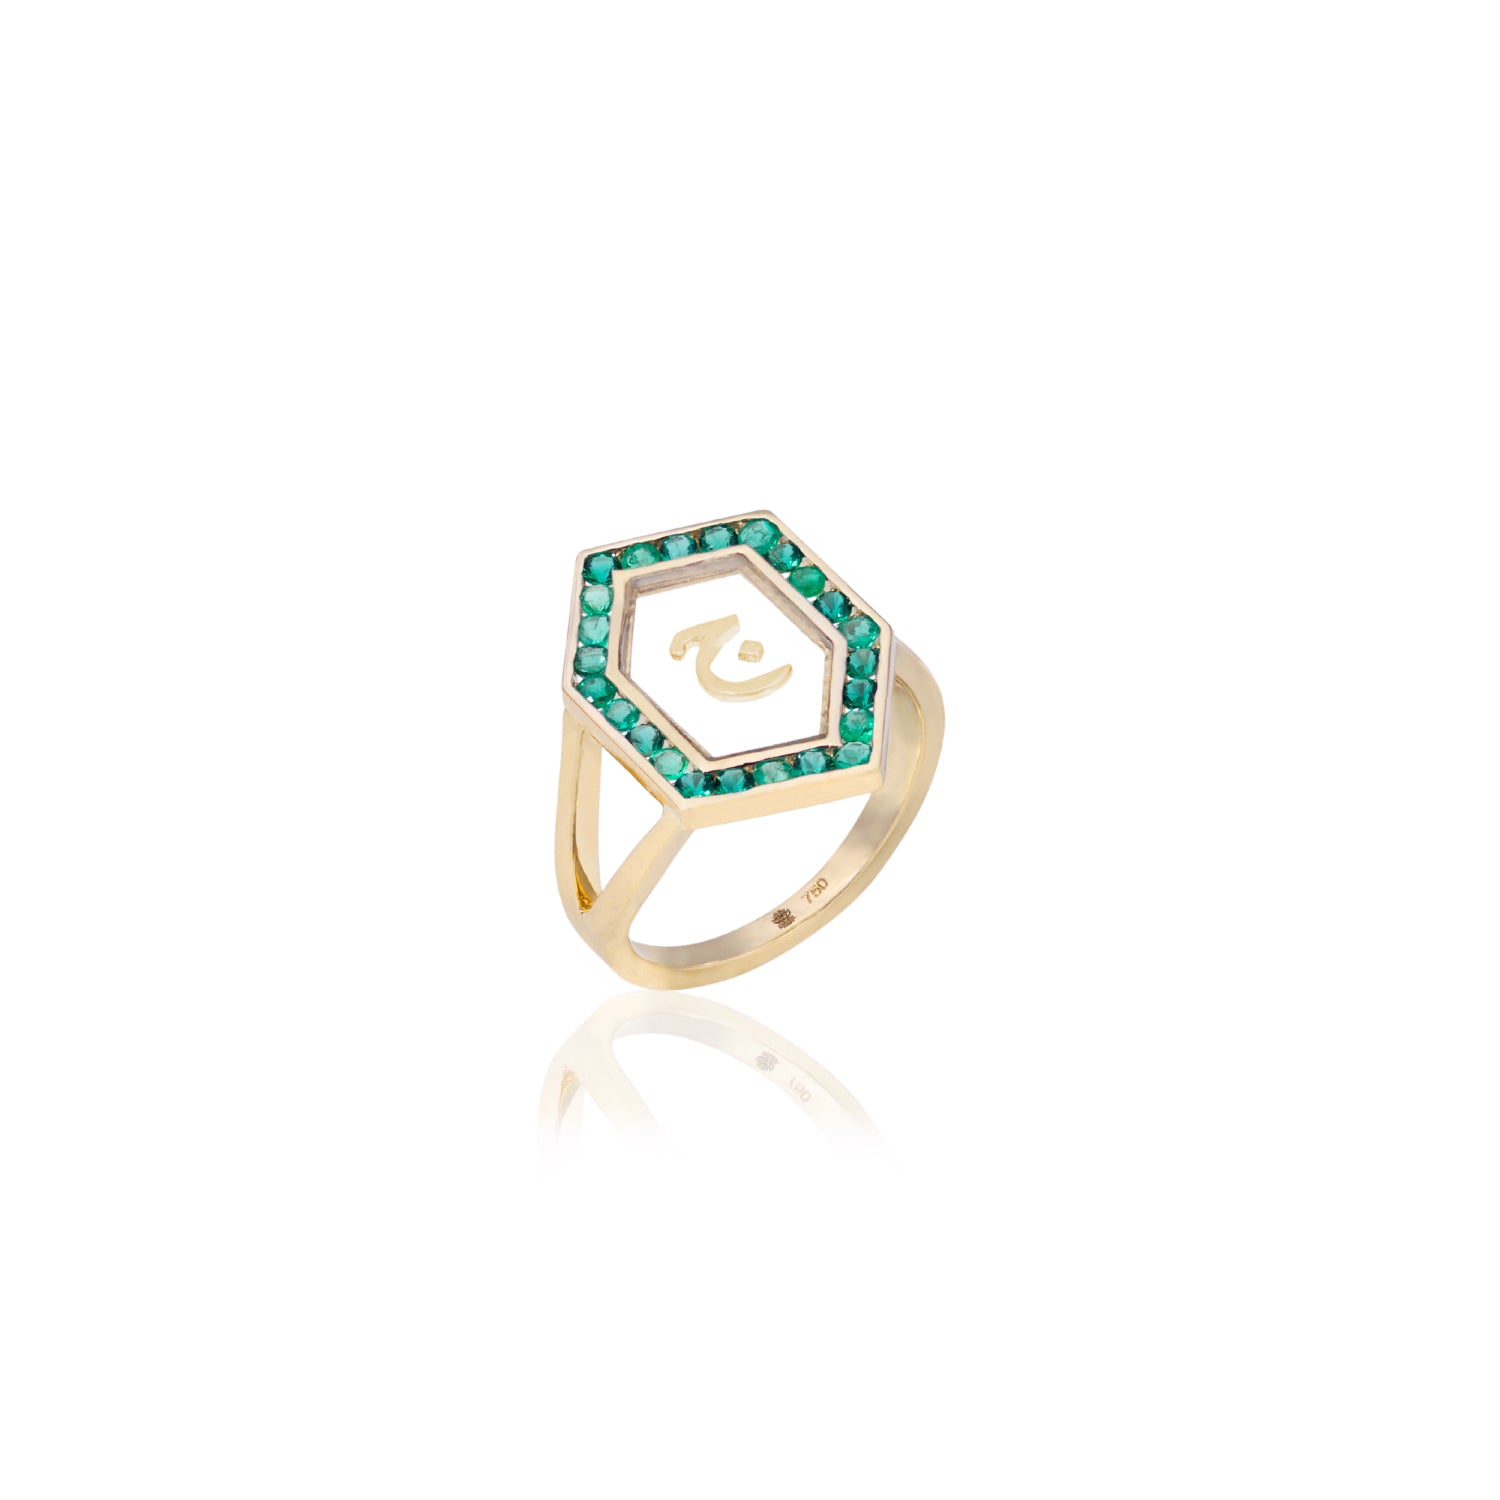 Qamoos 1.0 Letter ج Emerald Ring in Yellow Gold